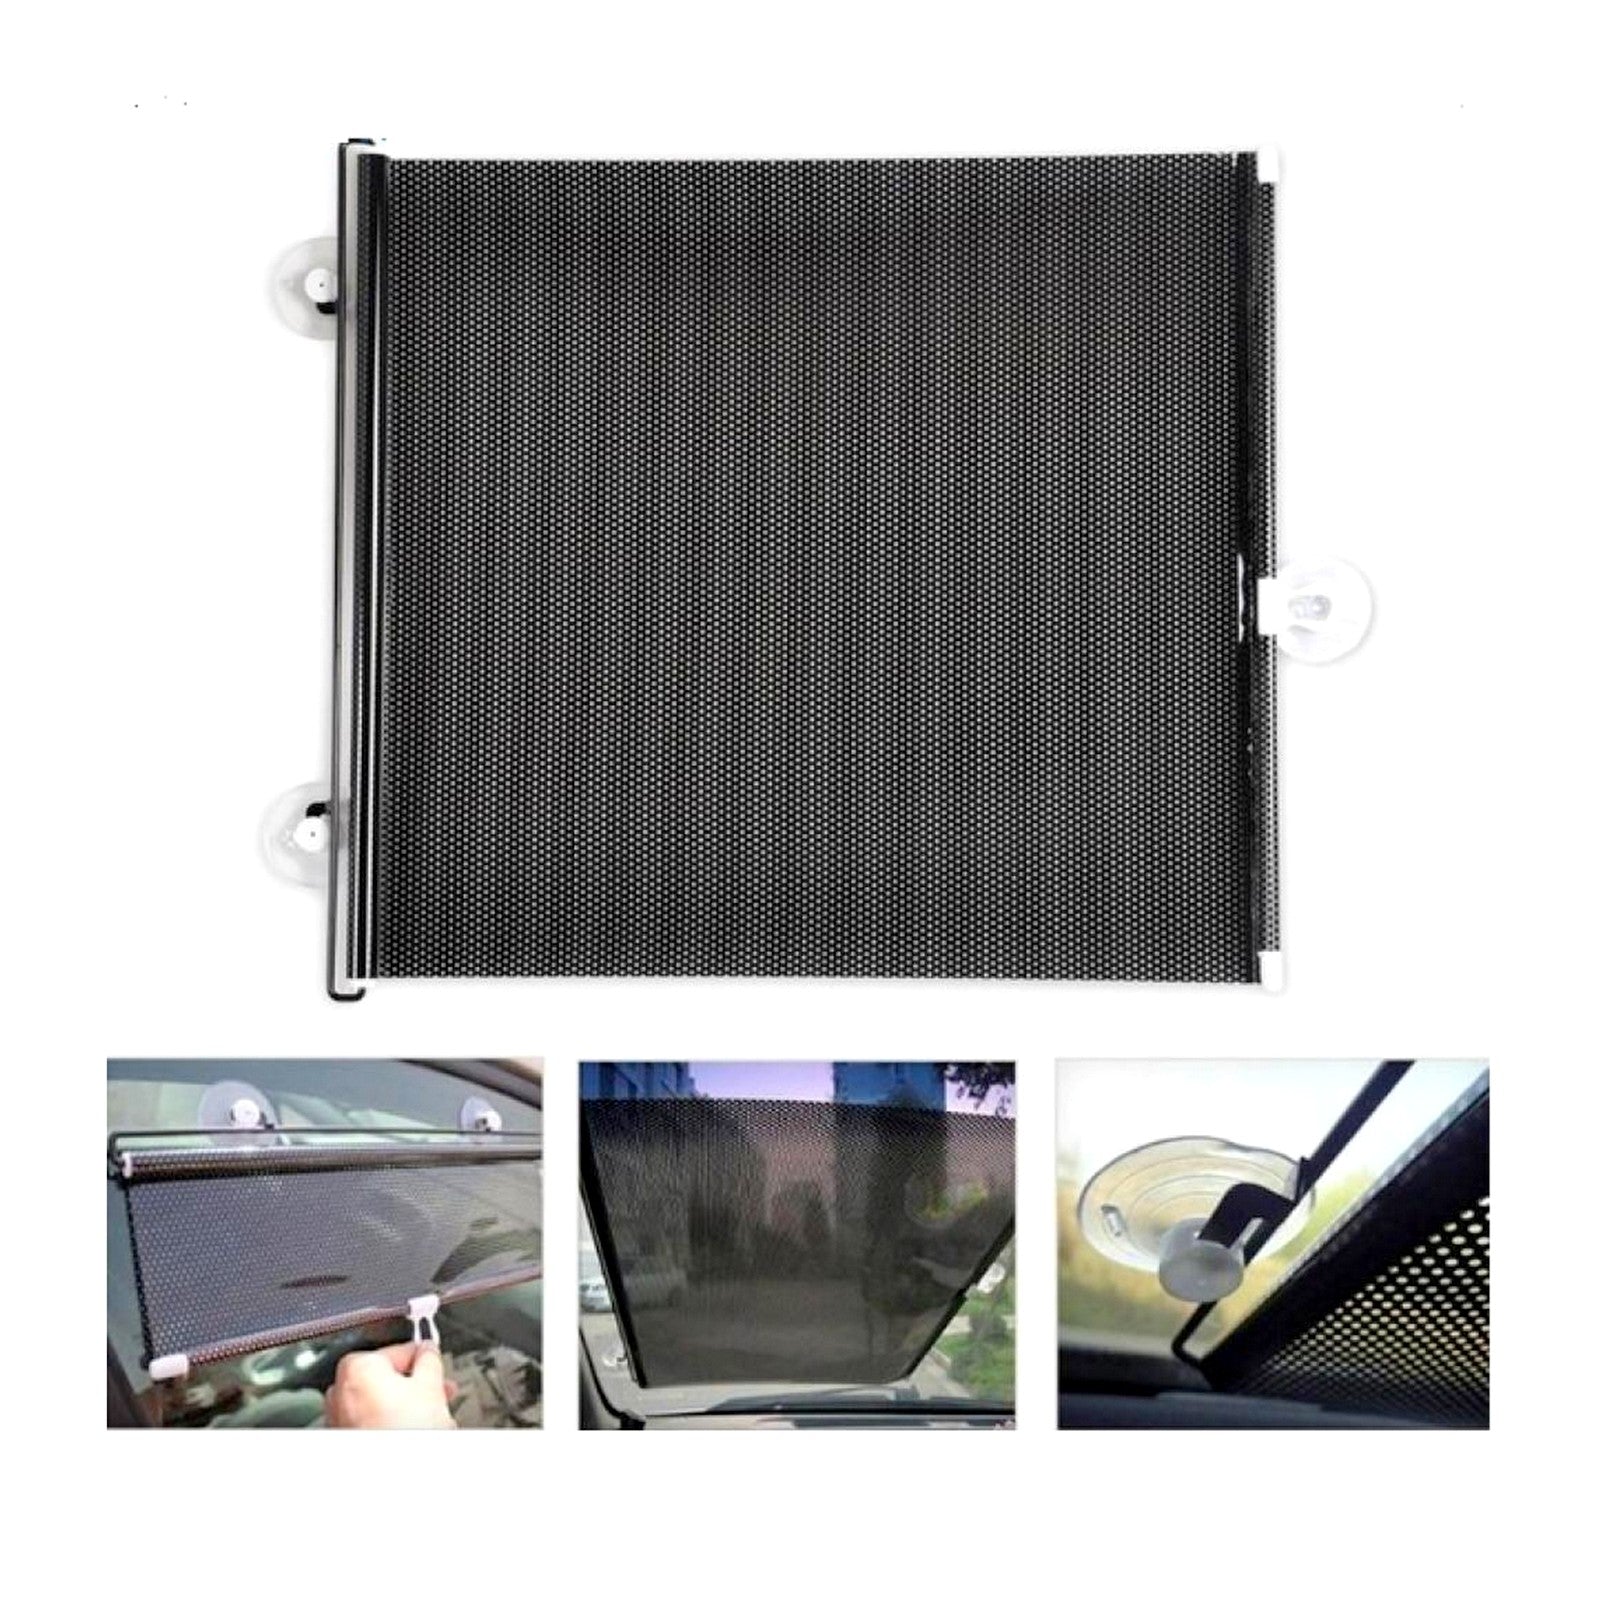 SUN SHADE ROLLER TYPE FOR FRONT WINDSHIELD